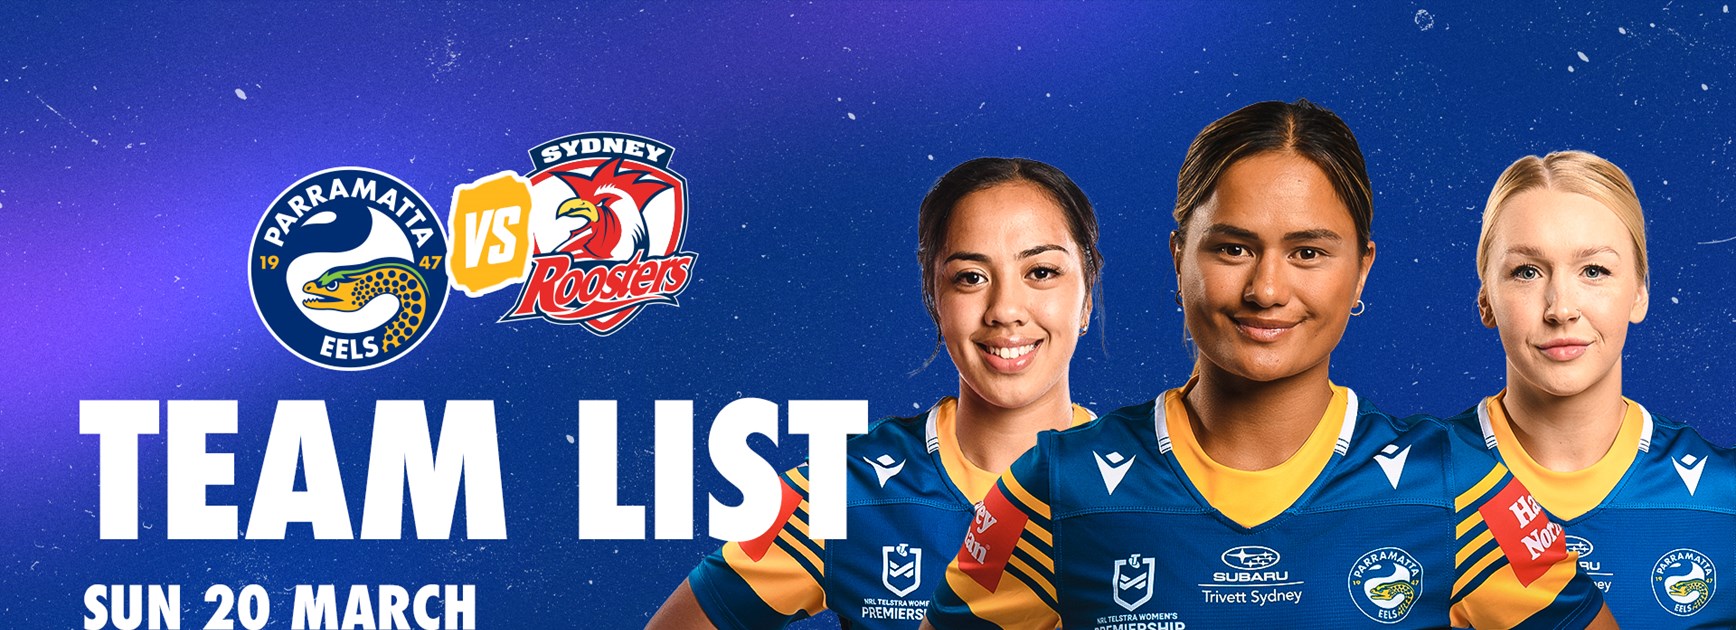 NRLW Team List - Eels v Roosters, Round Four